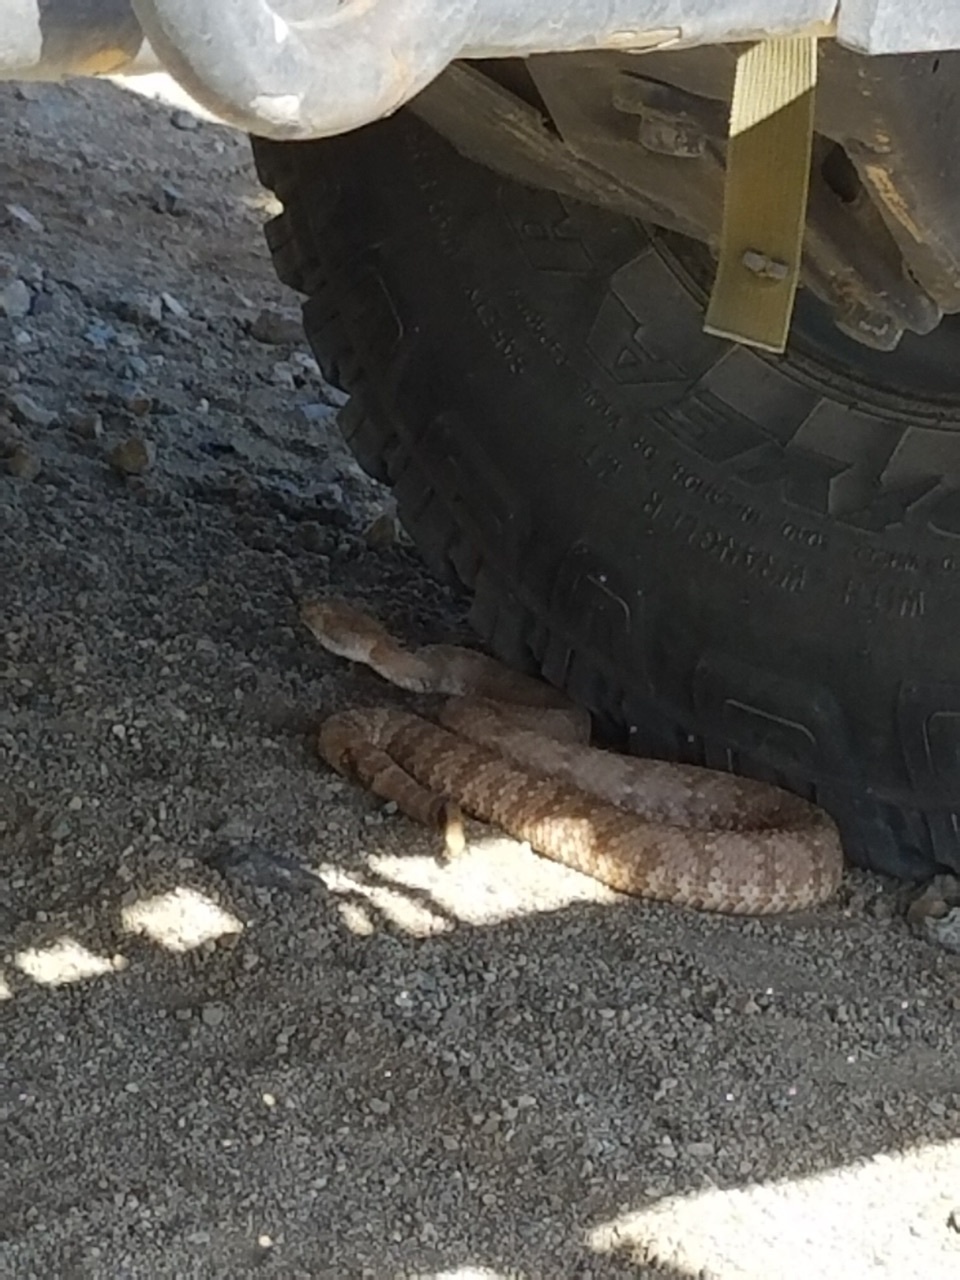 Rattlesnakes are afoot in the High Desert